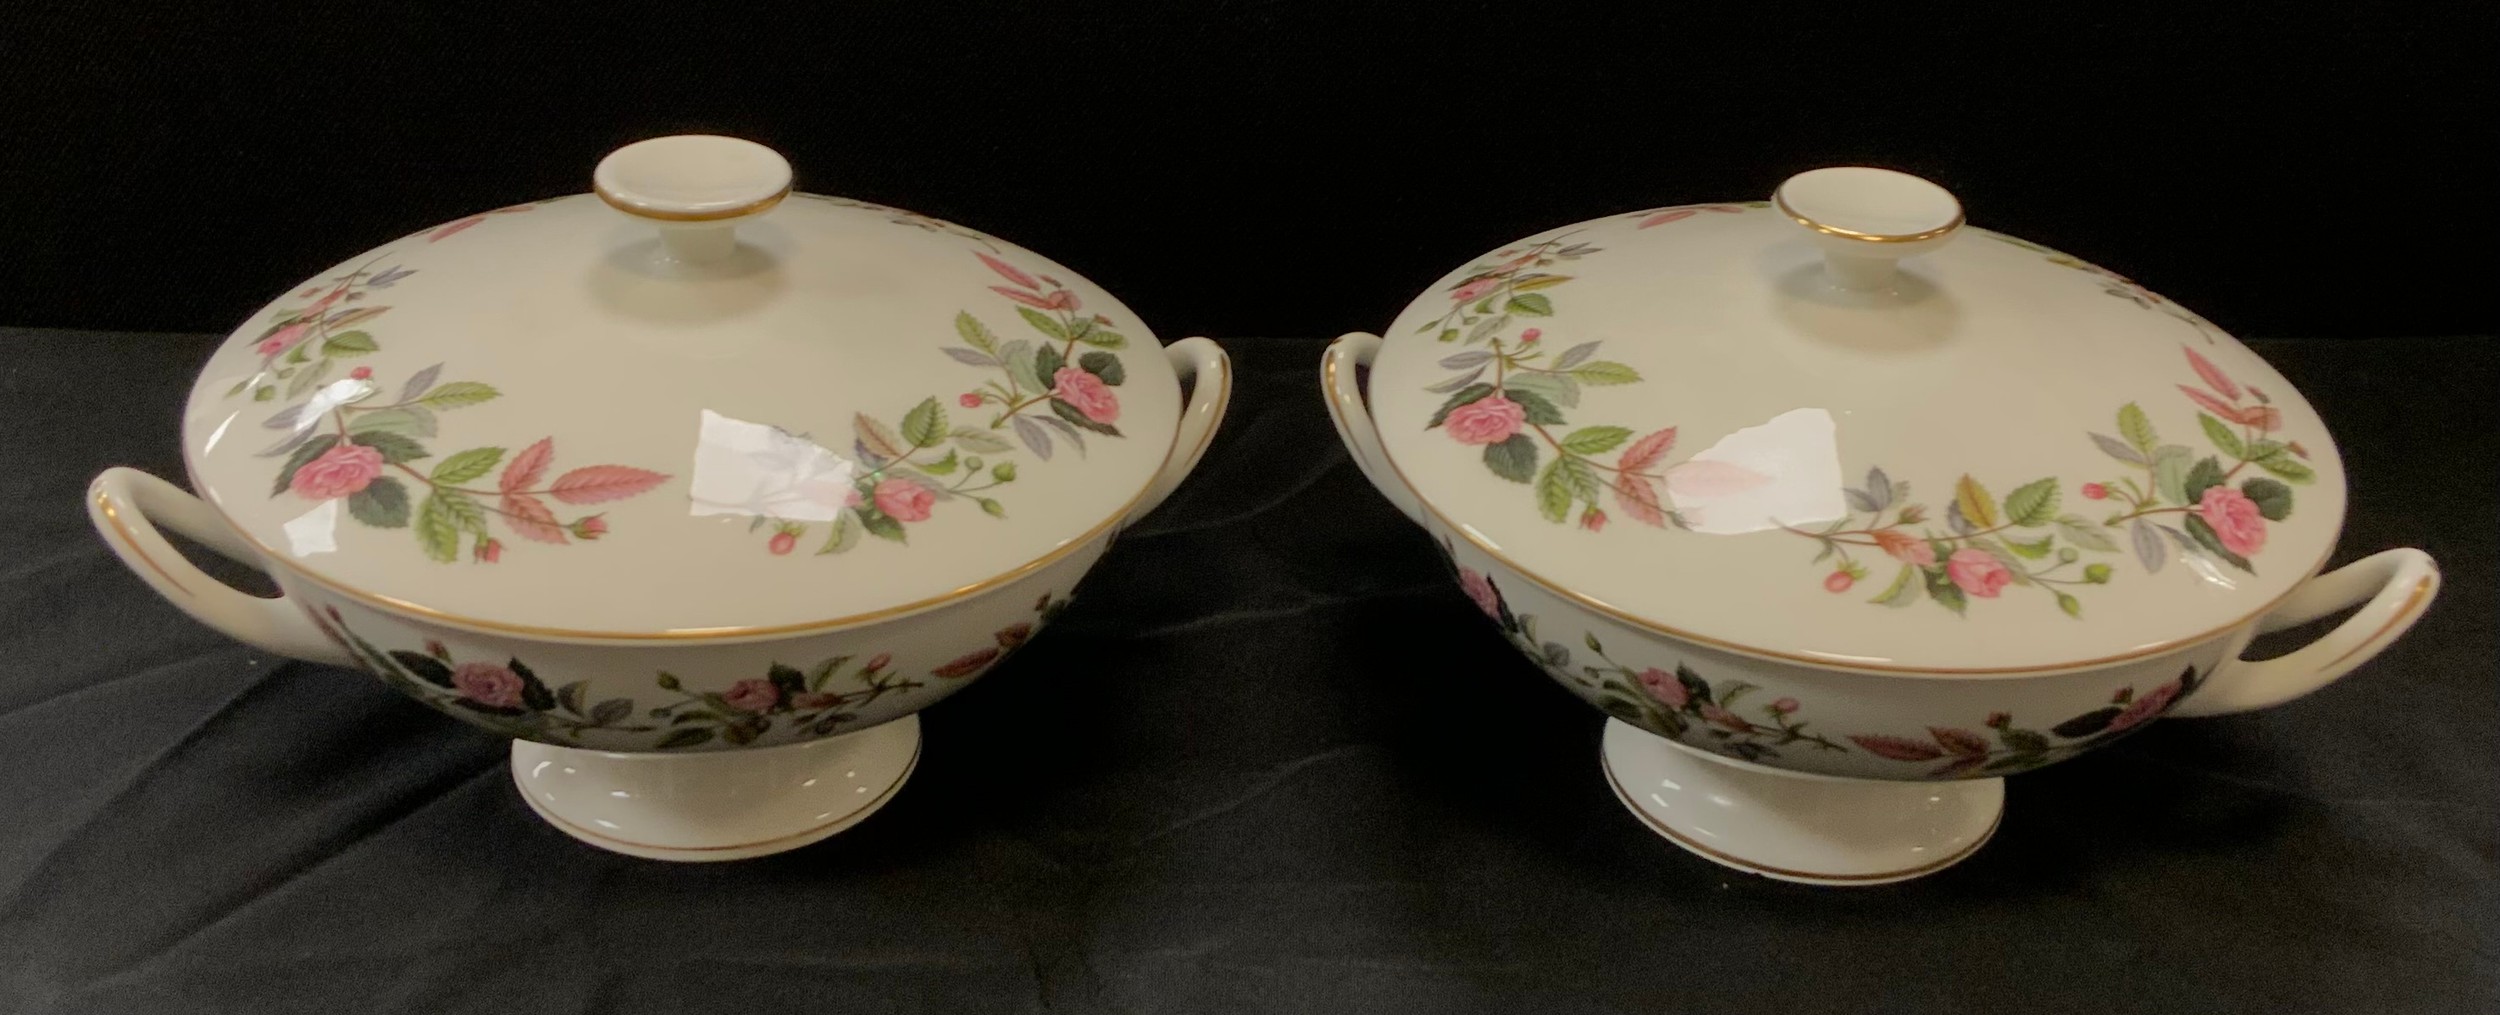 A Wedgwood ‘Hathaway rose’ part table service including six tea cups and saucers, four soup tureens, - Image 2 of 2